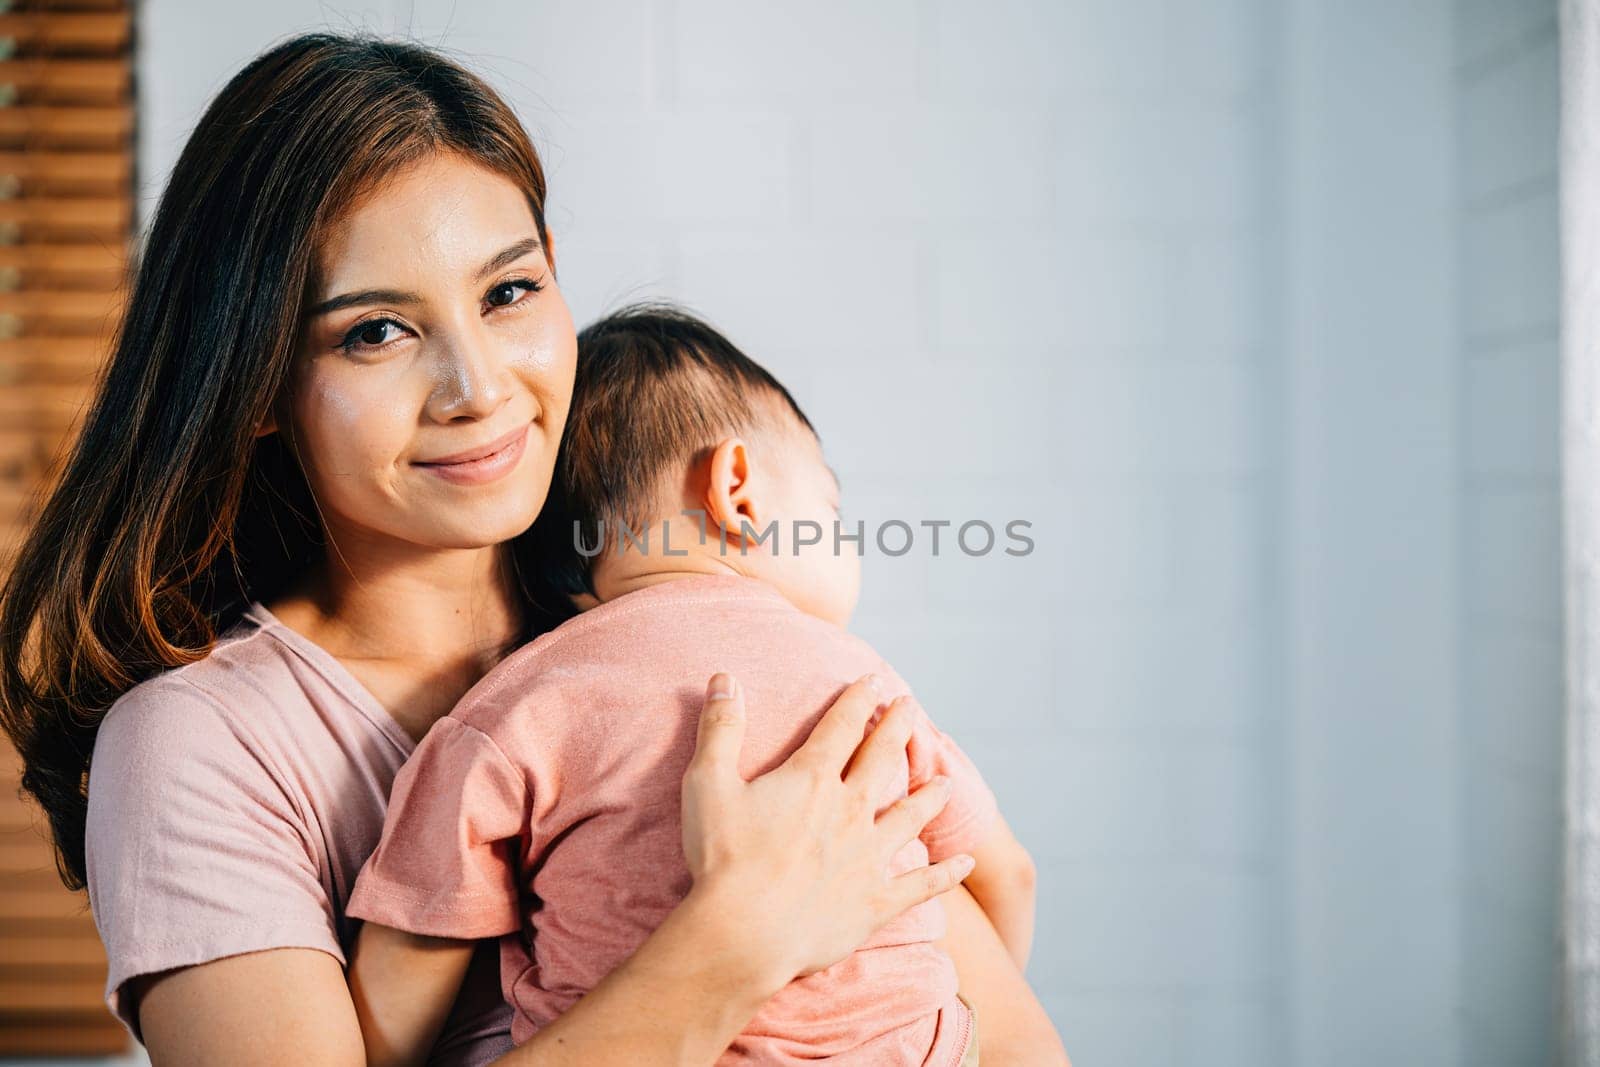 In loving embrace of their home affectionate Asian mom leans in to cuddle her peacefully sleeping infant celebrating heartwarming family moment filled with awe of new life and the joys of parenthood.